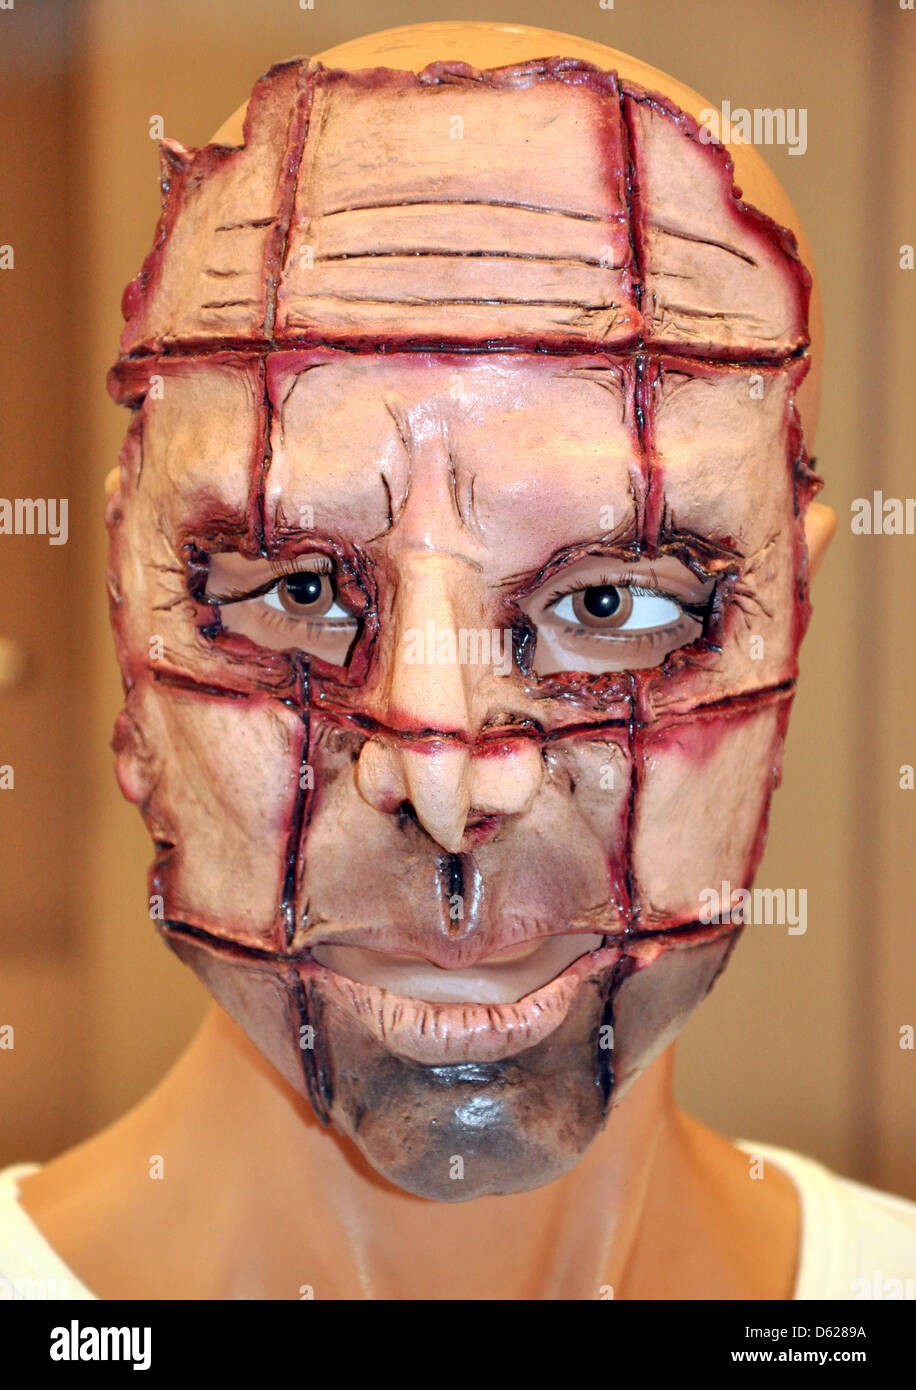 A replica of a horror mask that the police found with a suspect is shows during a press conference in Bielefeld, Germany, 15 May 2012. The violent killing of an 82 year old woman in Bielefeld seems to have been solved. A horror mask and a knife have been found with traces of blood on them at the home of the 18 year old suspect. Photo: Matthias Benirschke Stock Photo